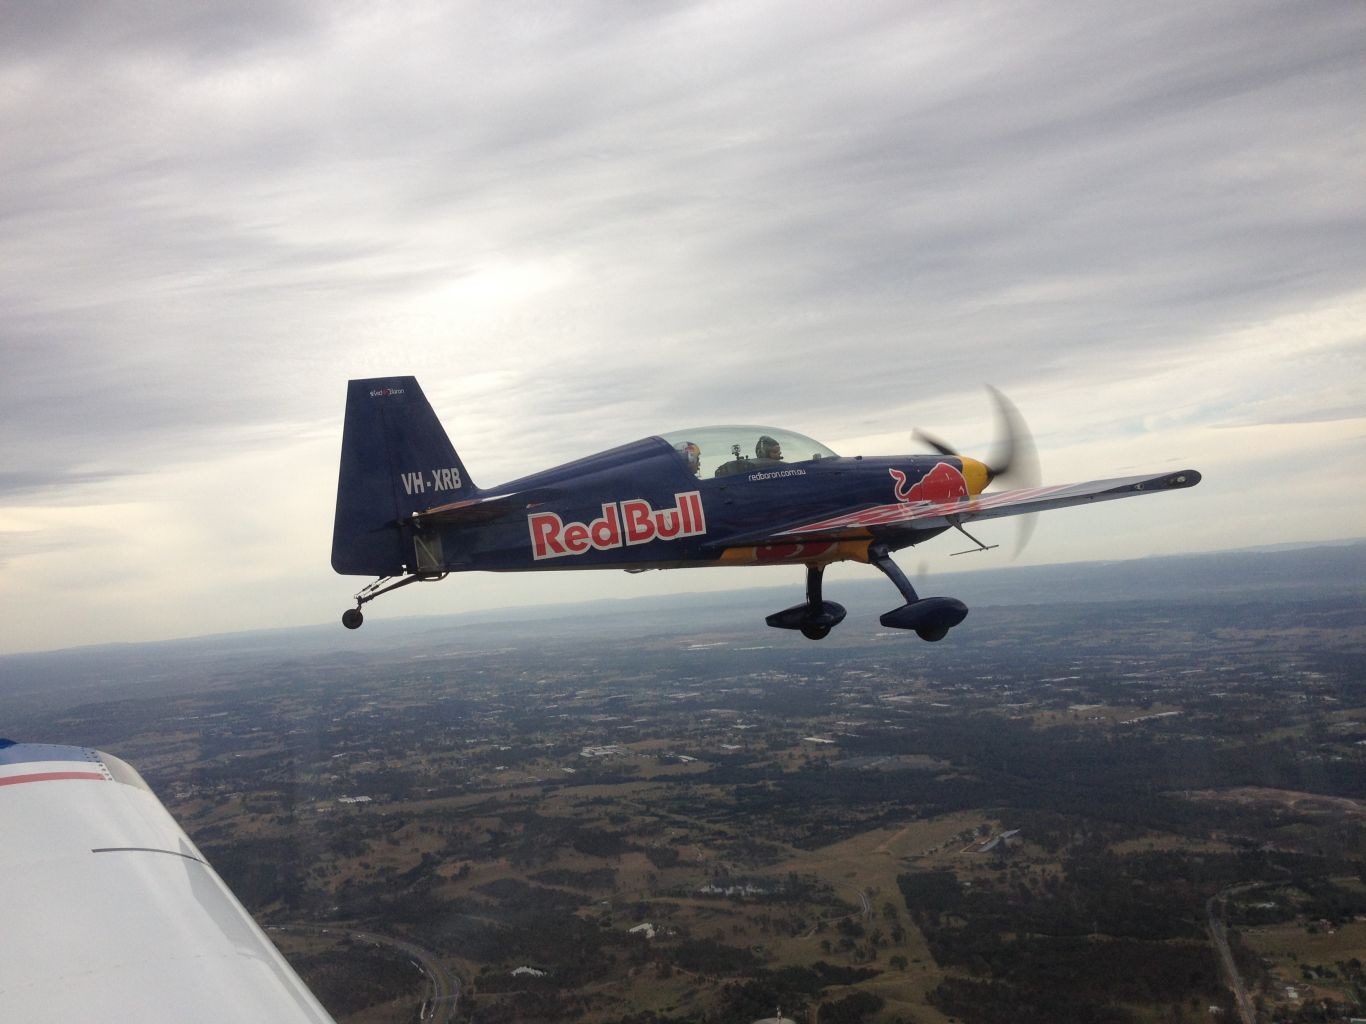 Formation flying, Alpha 160 and a Red Bull Extra!